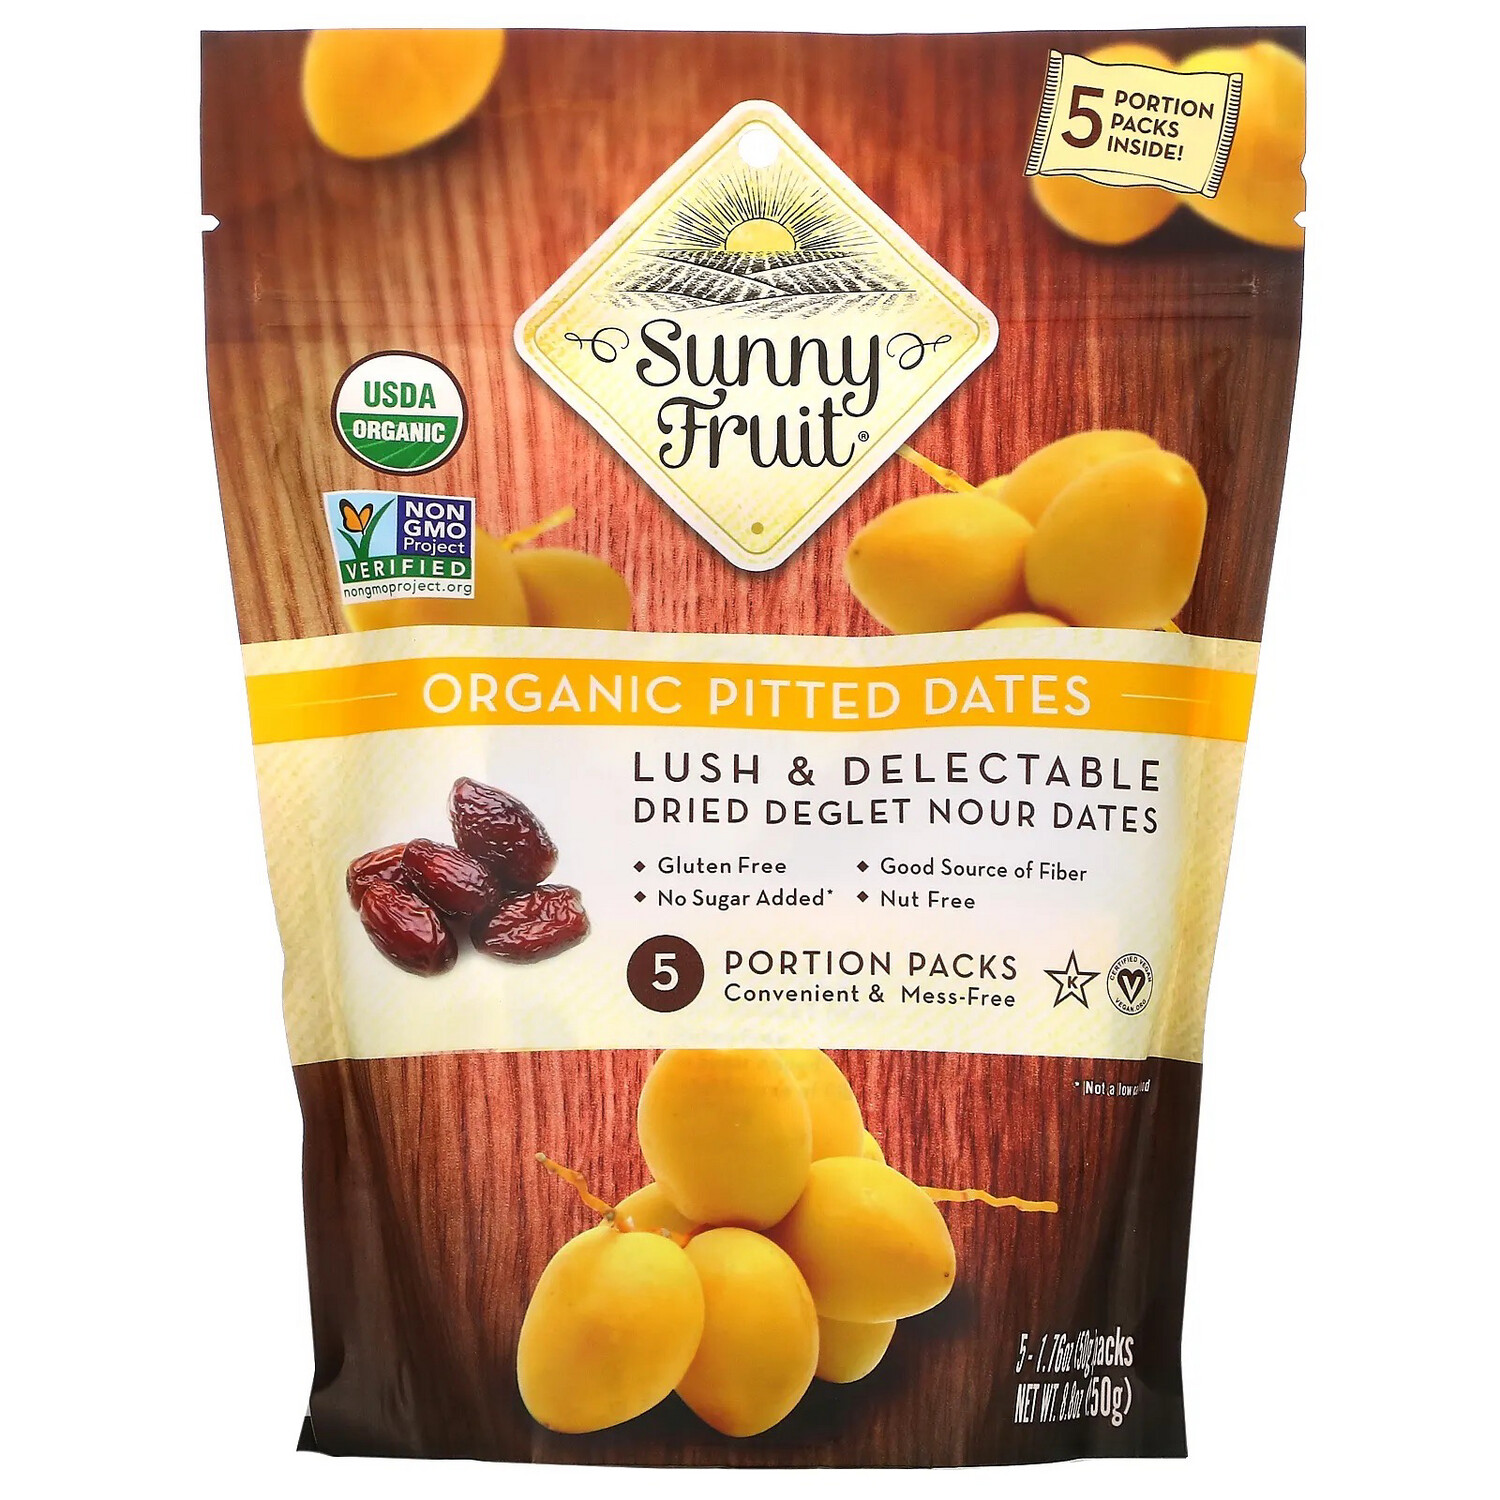 Sunny Fruit Organic Pitted Dates 5 Portion Packs